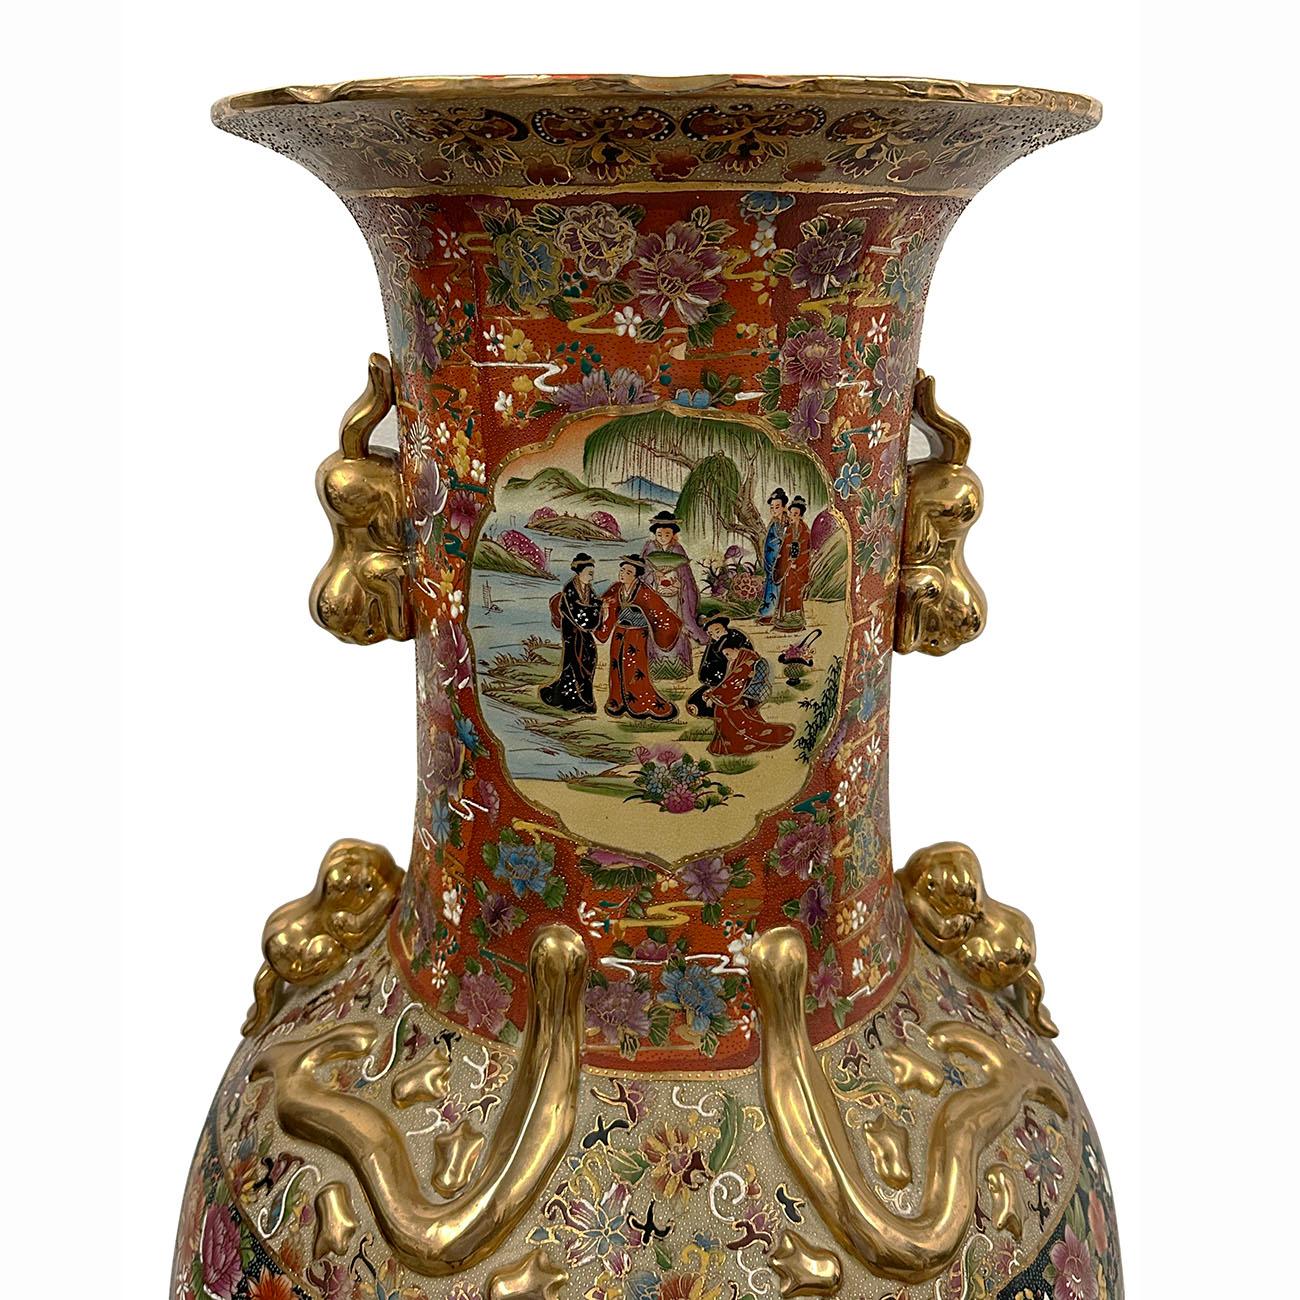 This magnificent Chinese Rose Medallion Tall floor vases also know as 